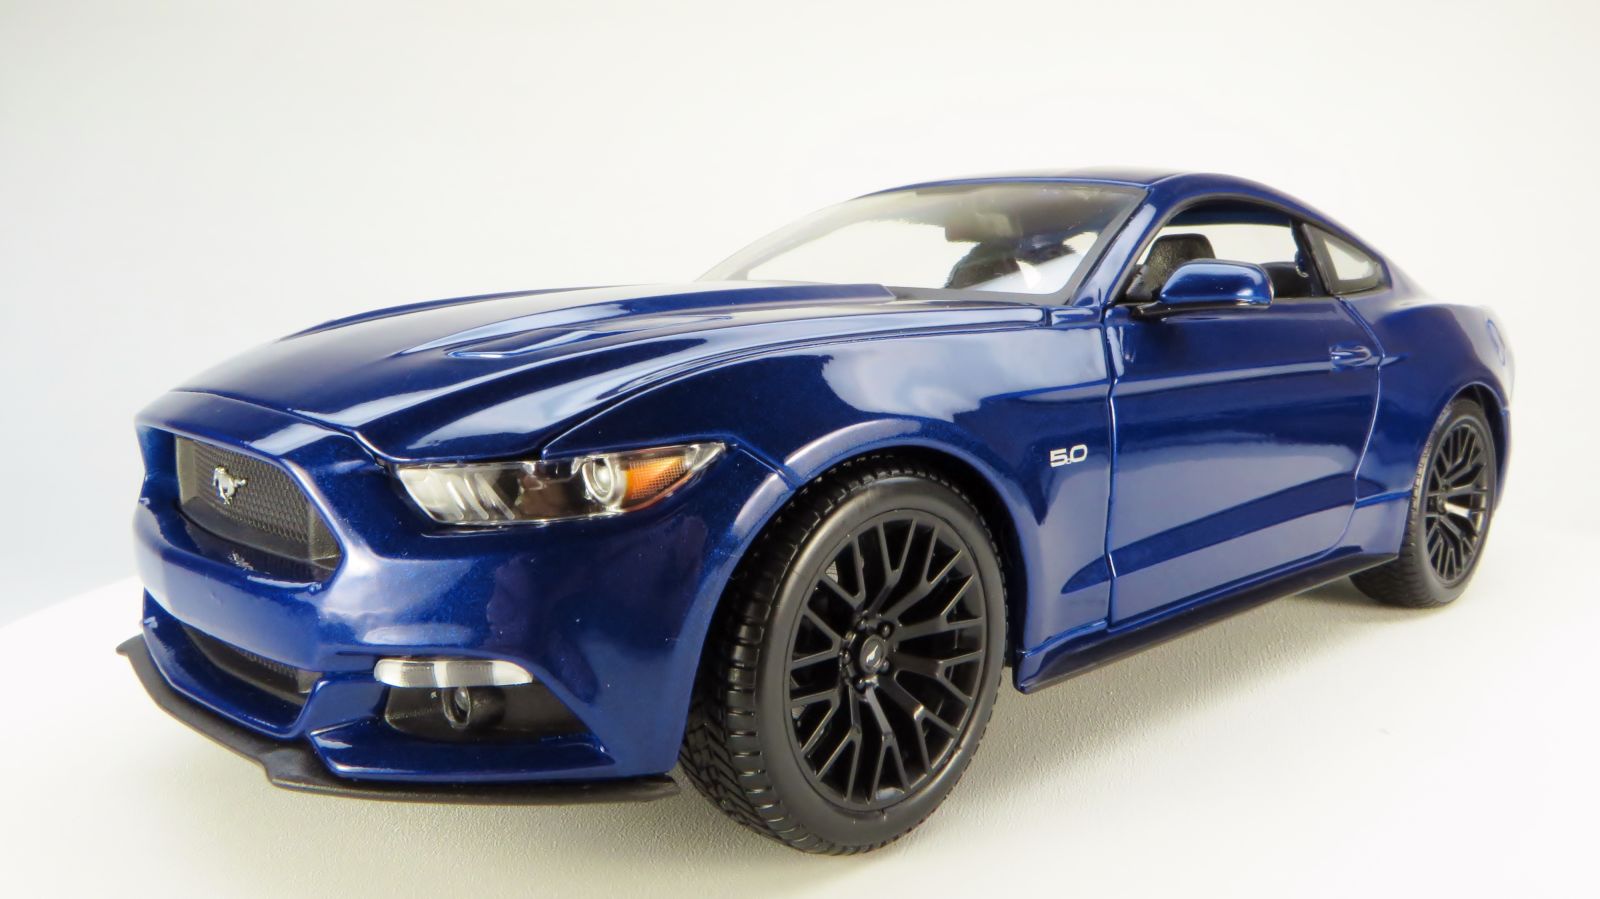 Illustration for article titled So how does the 1:18 Scale 2015 Maisto Mustang GT Stack Up?